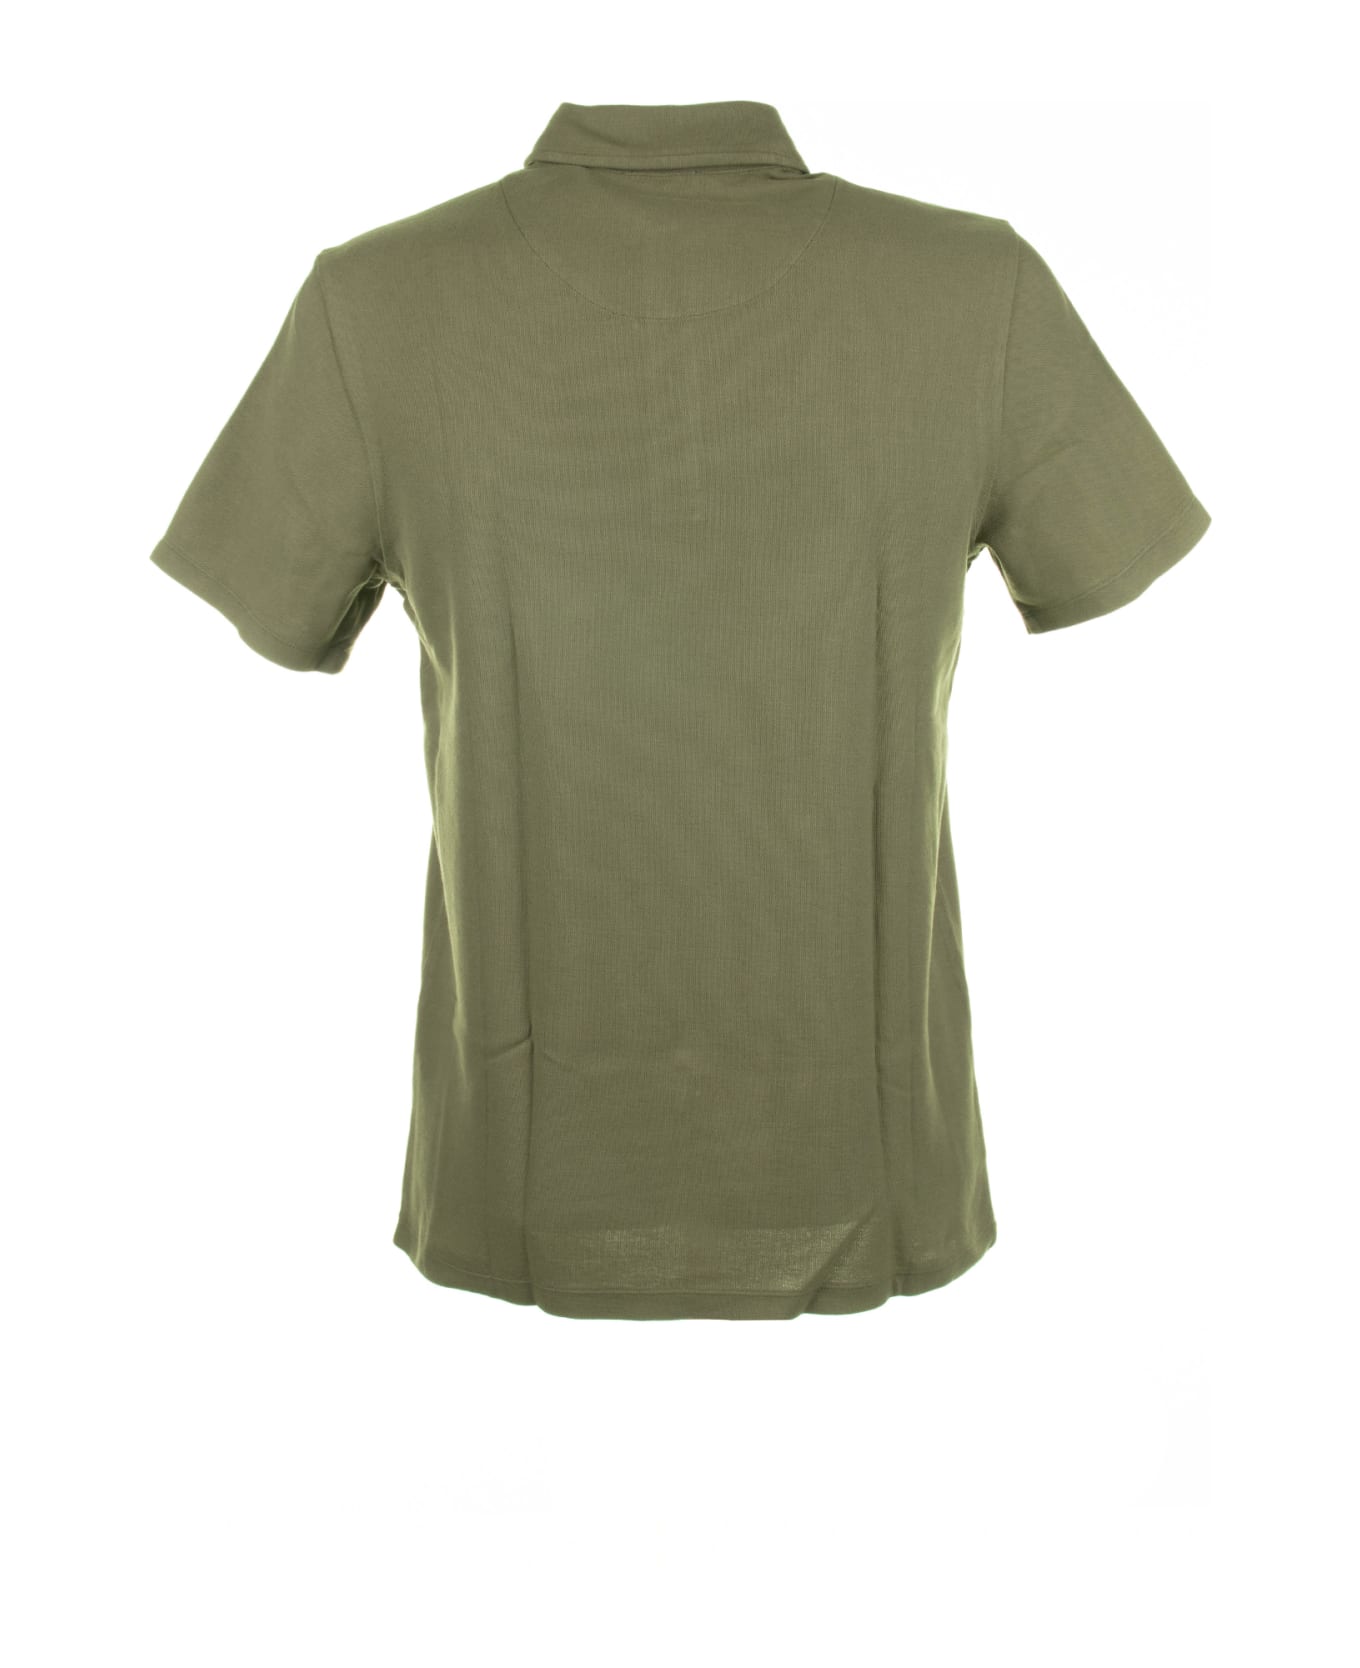 Altea Military Short-sleeved Polo Shirt In Cotton - MILITARE